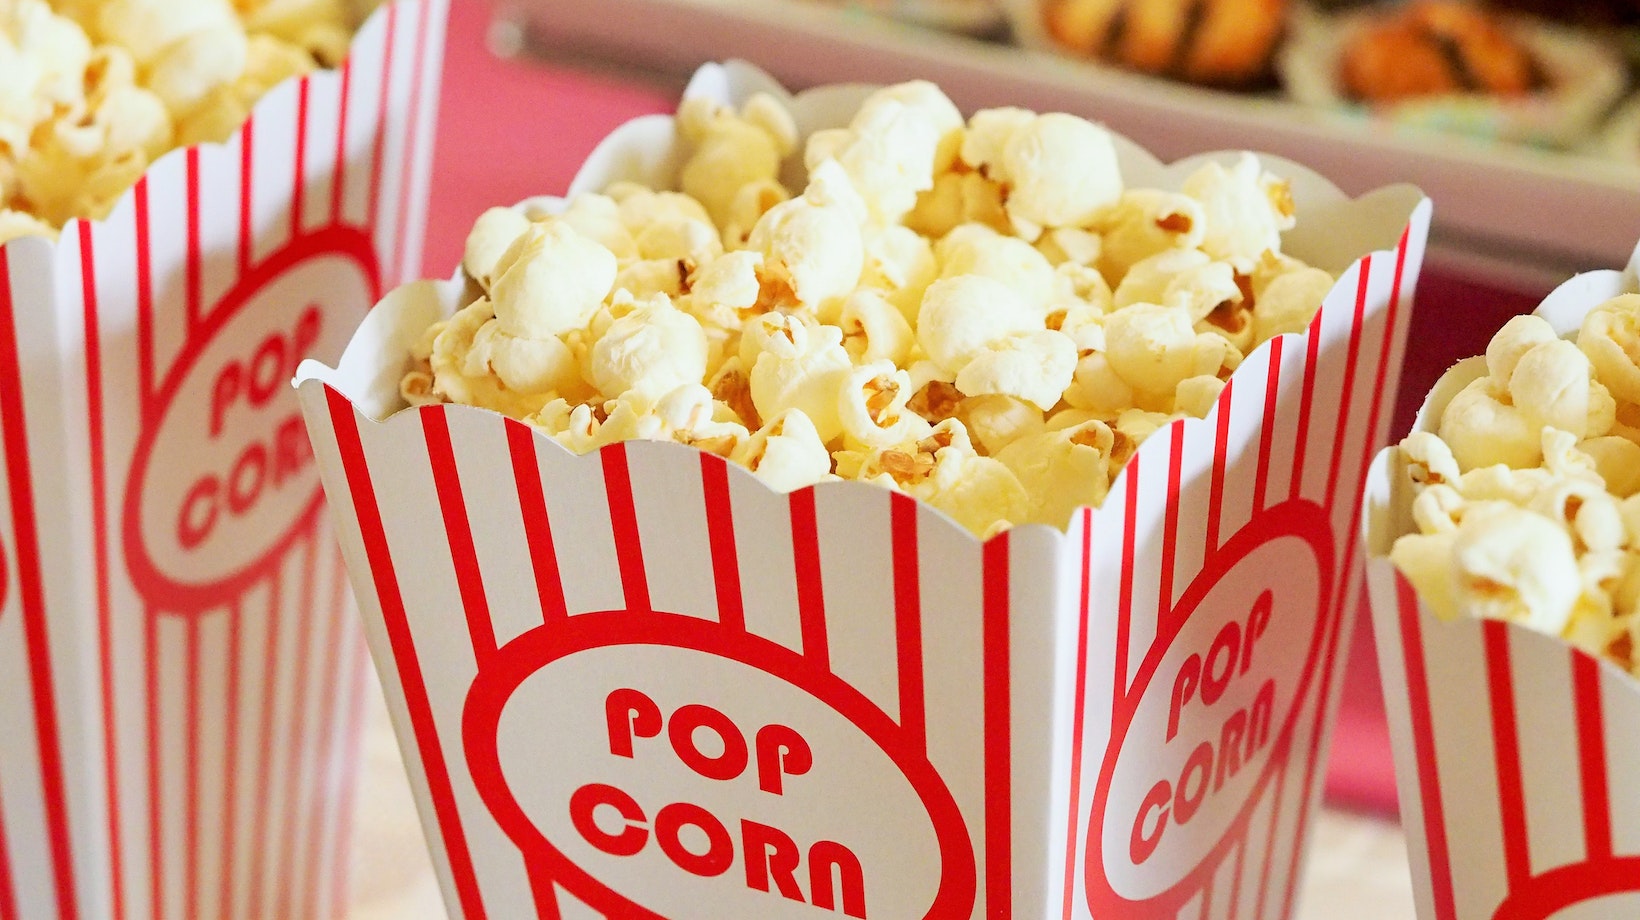 can you buy popcorn at the movies without seeing a movie